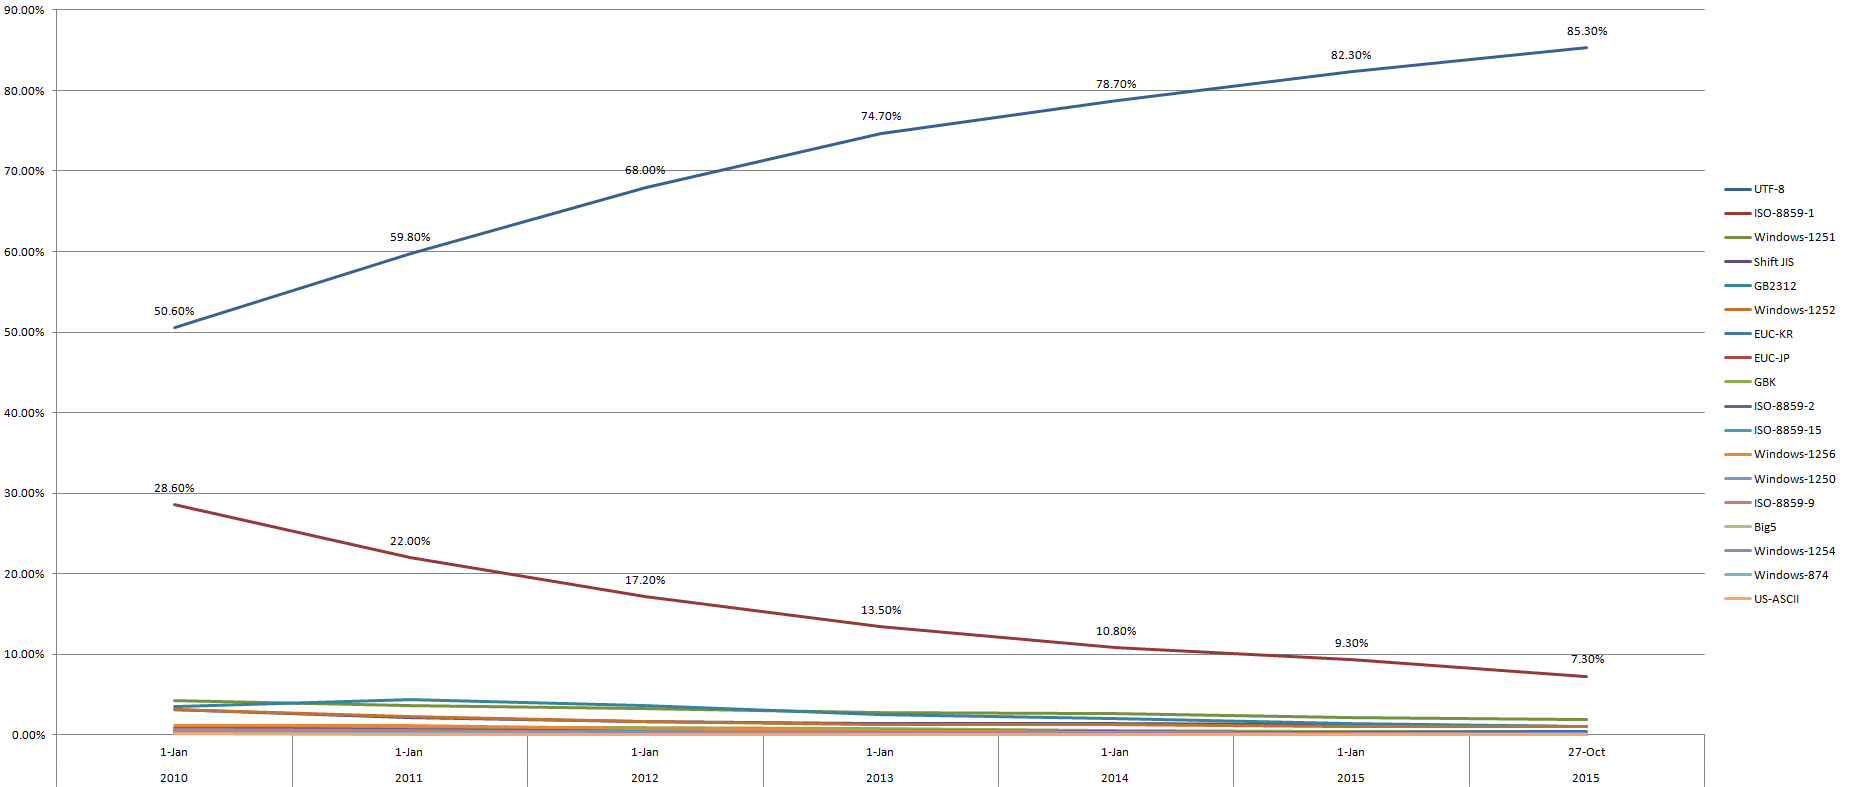 growth in Unicode UTF-8 encoding on Web pages, 2010-2015